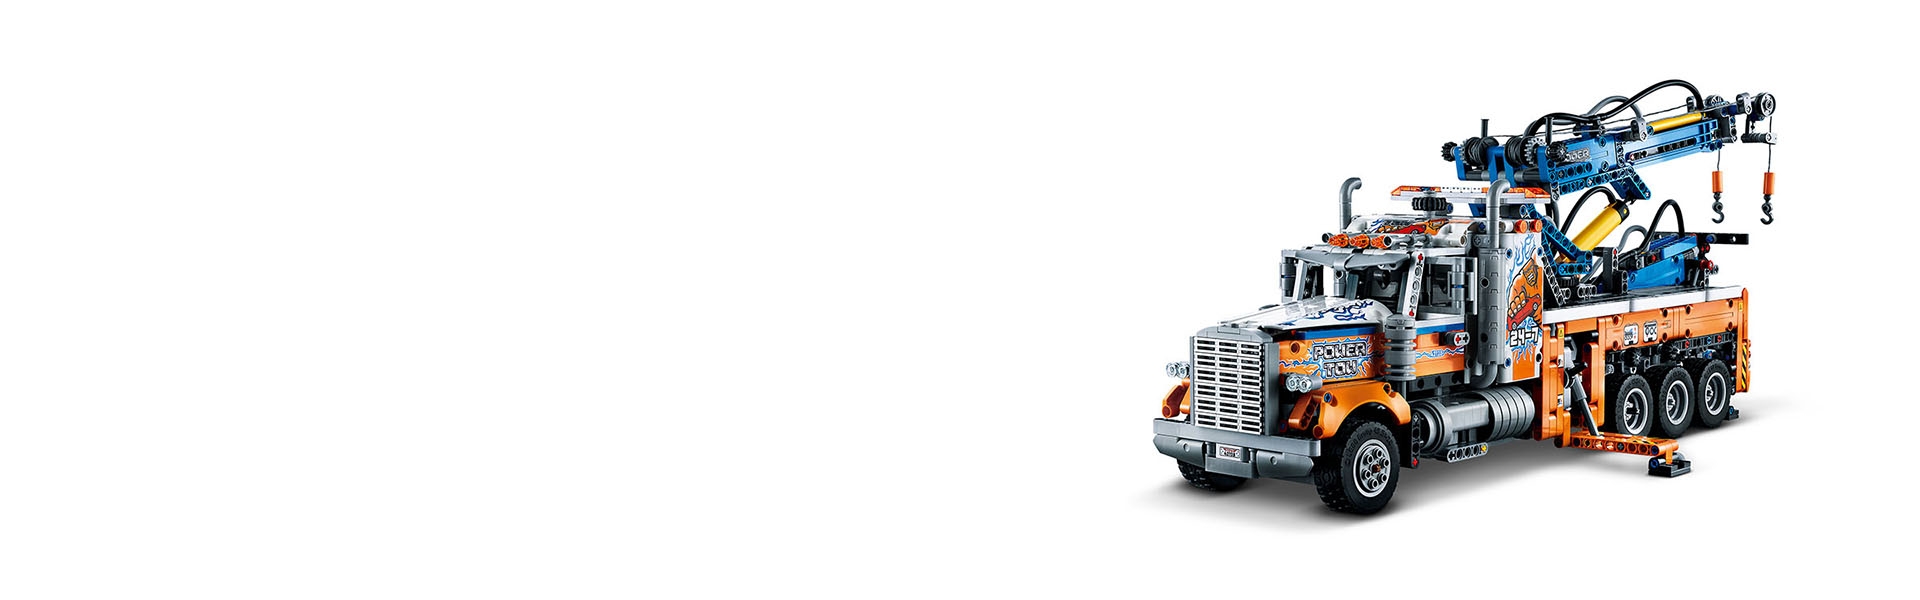 Heavy-duty Tow Truck 42128 | Technic | Buy online at the Official